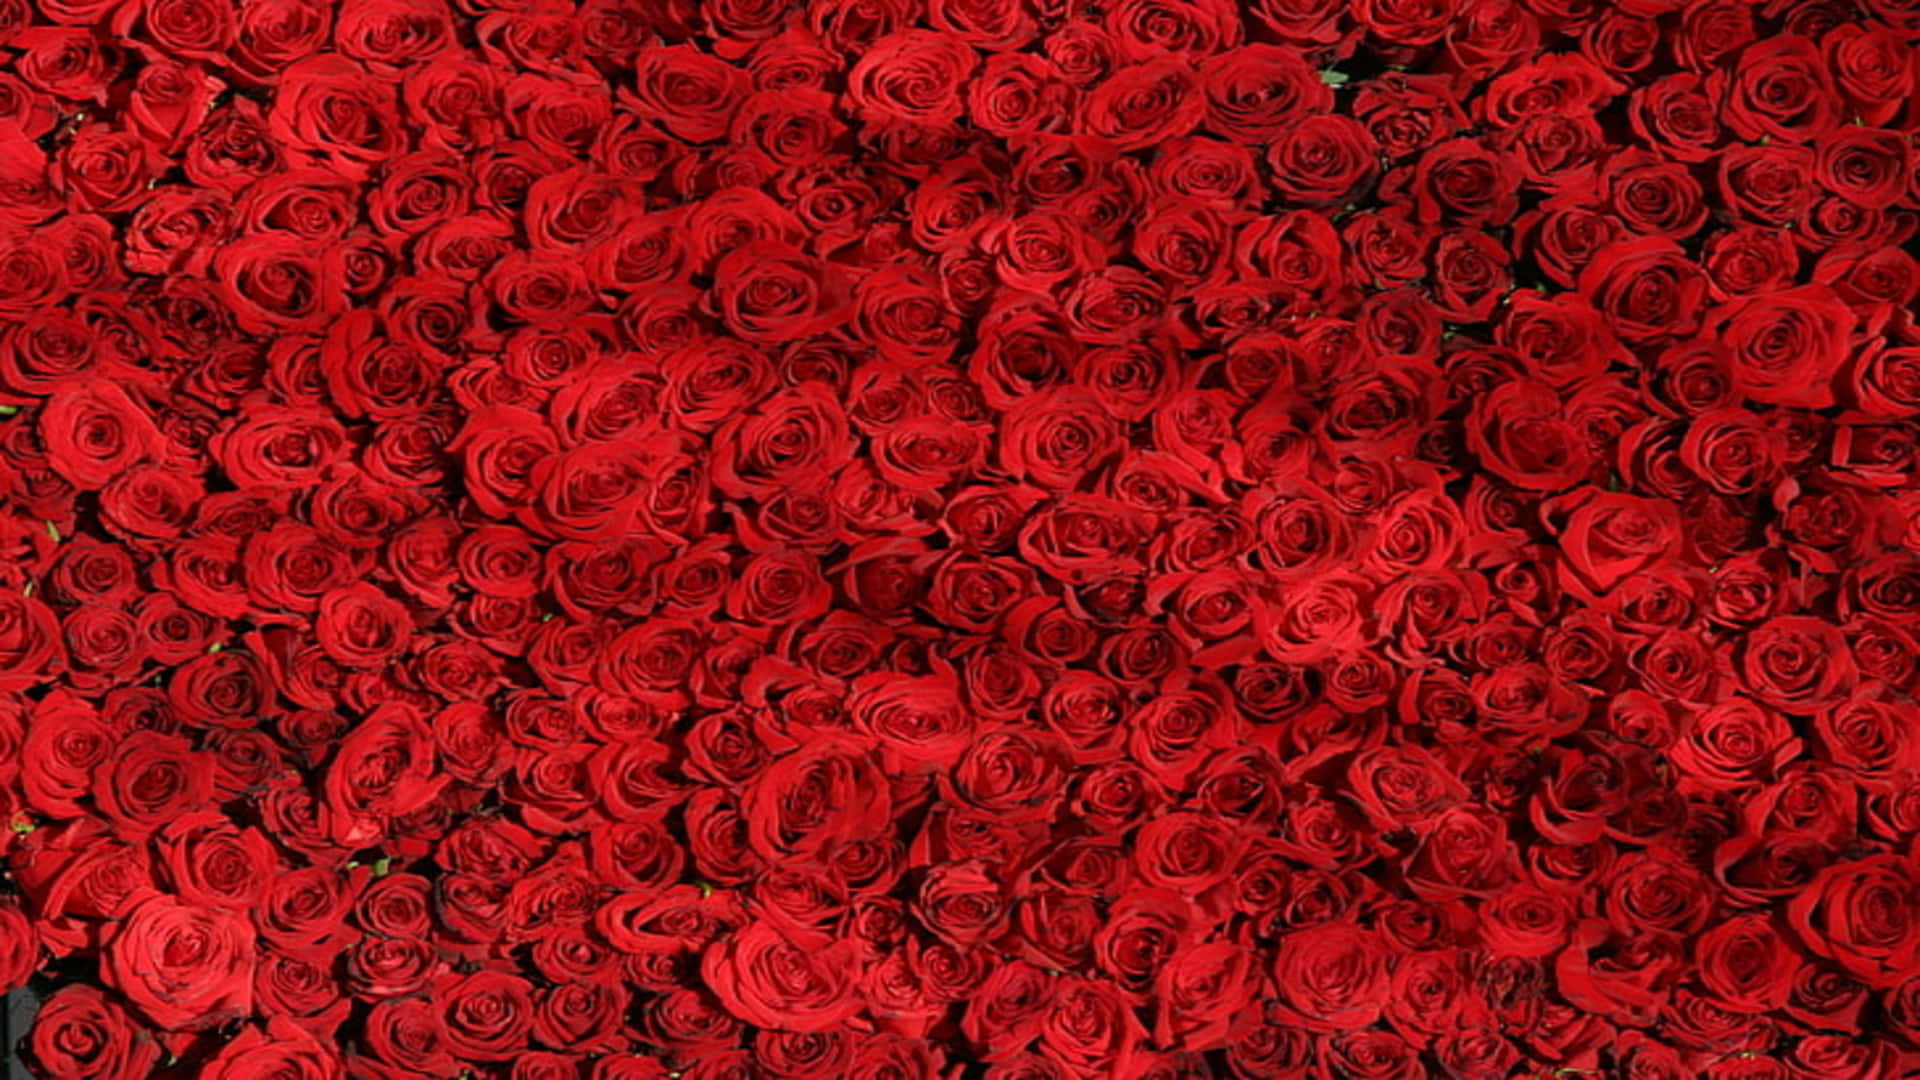 1080p Pile Of Red Roses Background